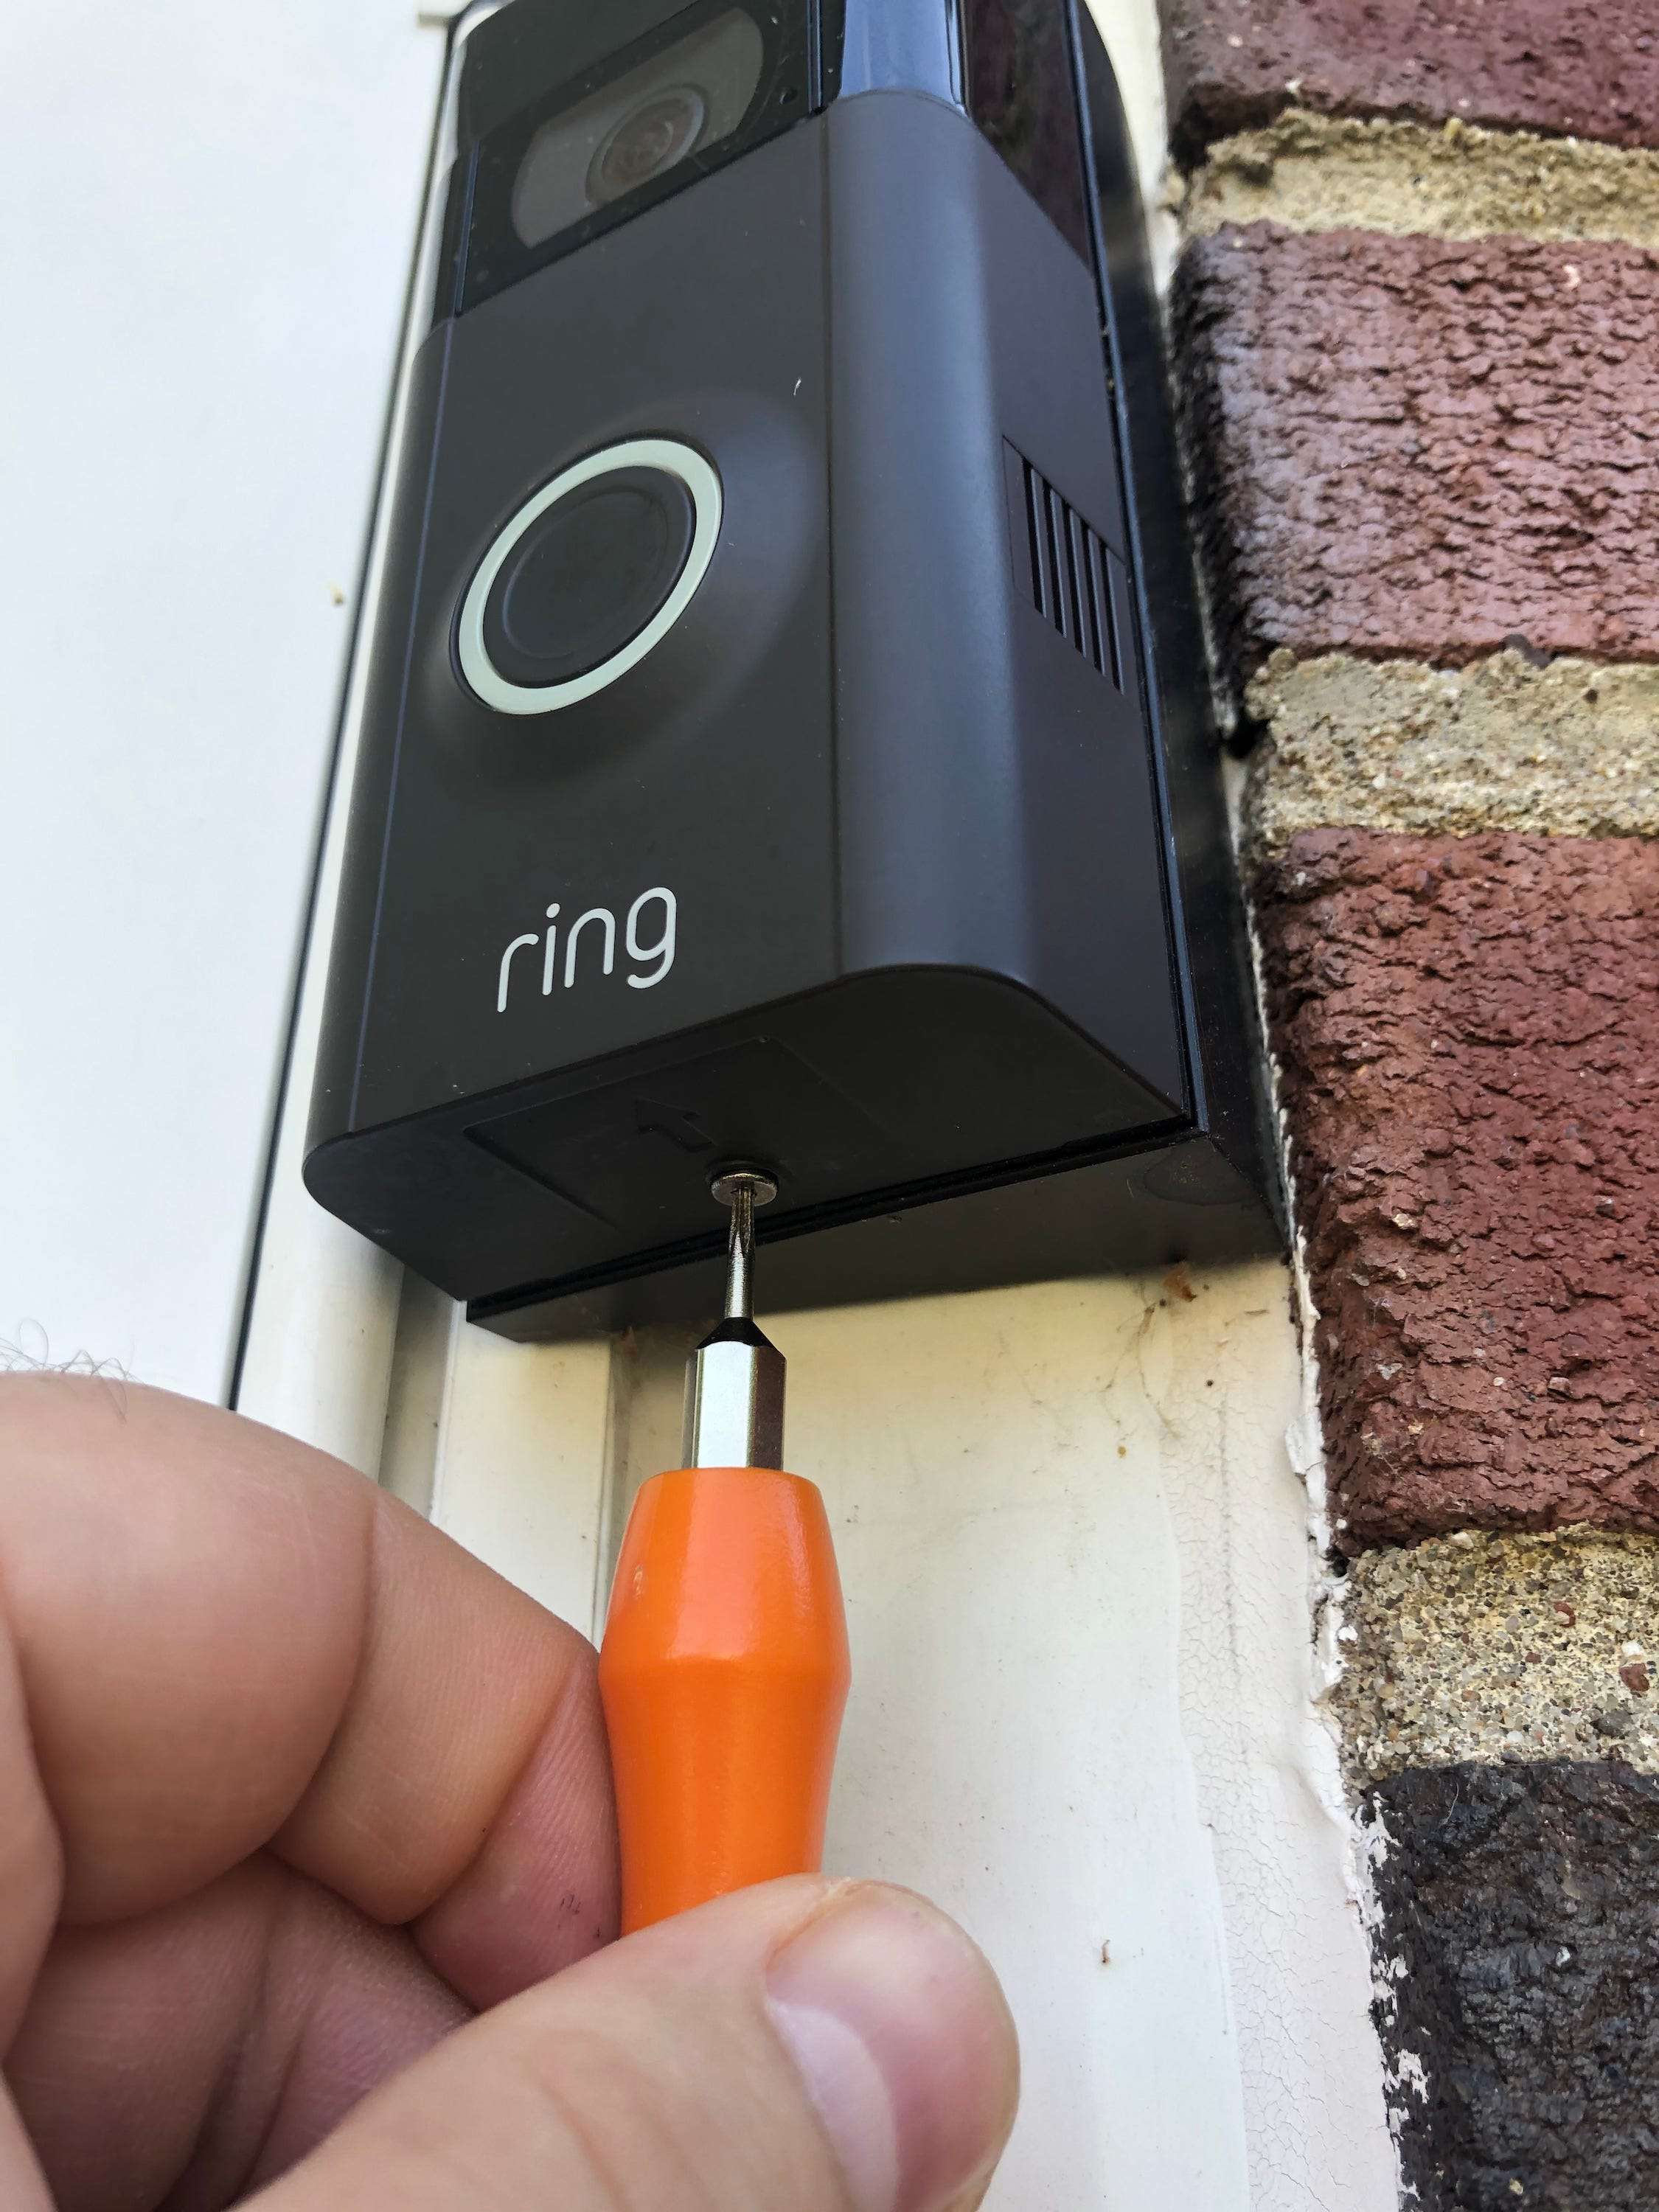 amazon-drops-first-gen-ring-doorbell-price-to-100-after-closing